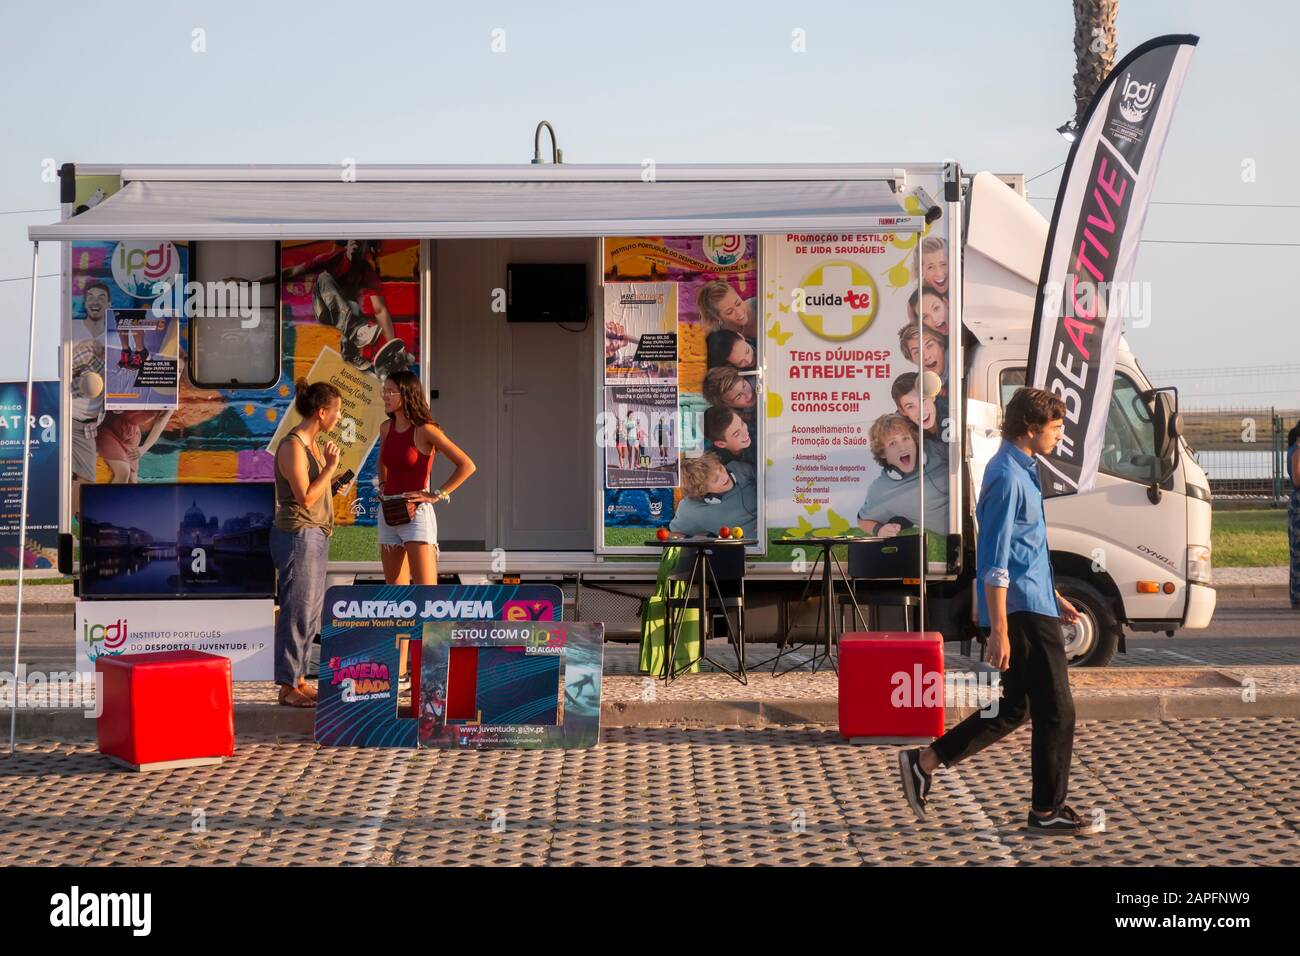 faro -portugal-7th-september-2019-youth-card-car-booth-in-festival-f-a-big-music-festival-on-the-city-of- faro-portugal-2APFNW9.jpg